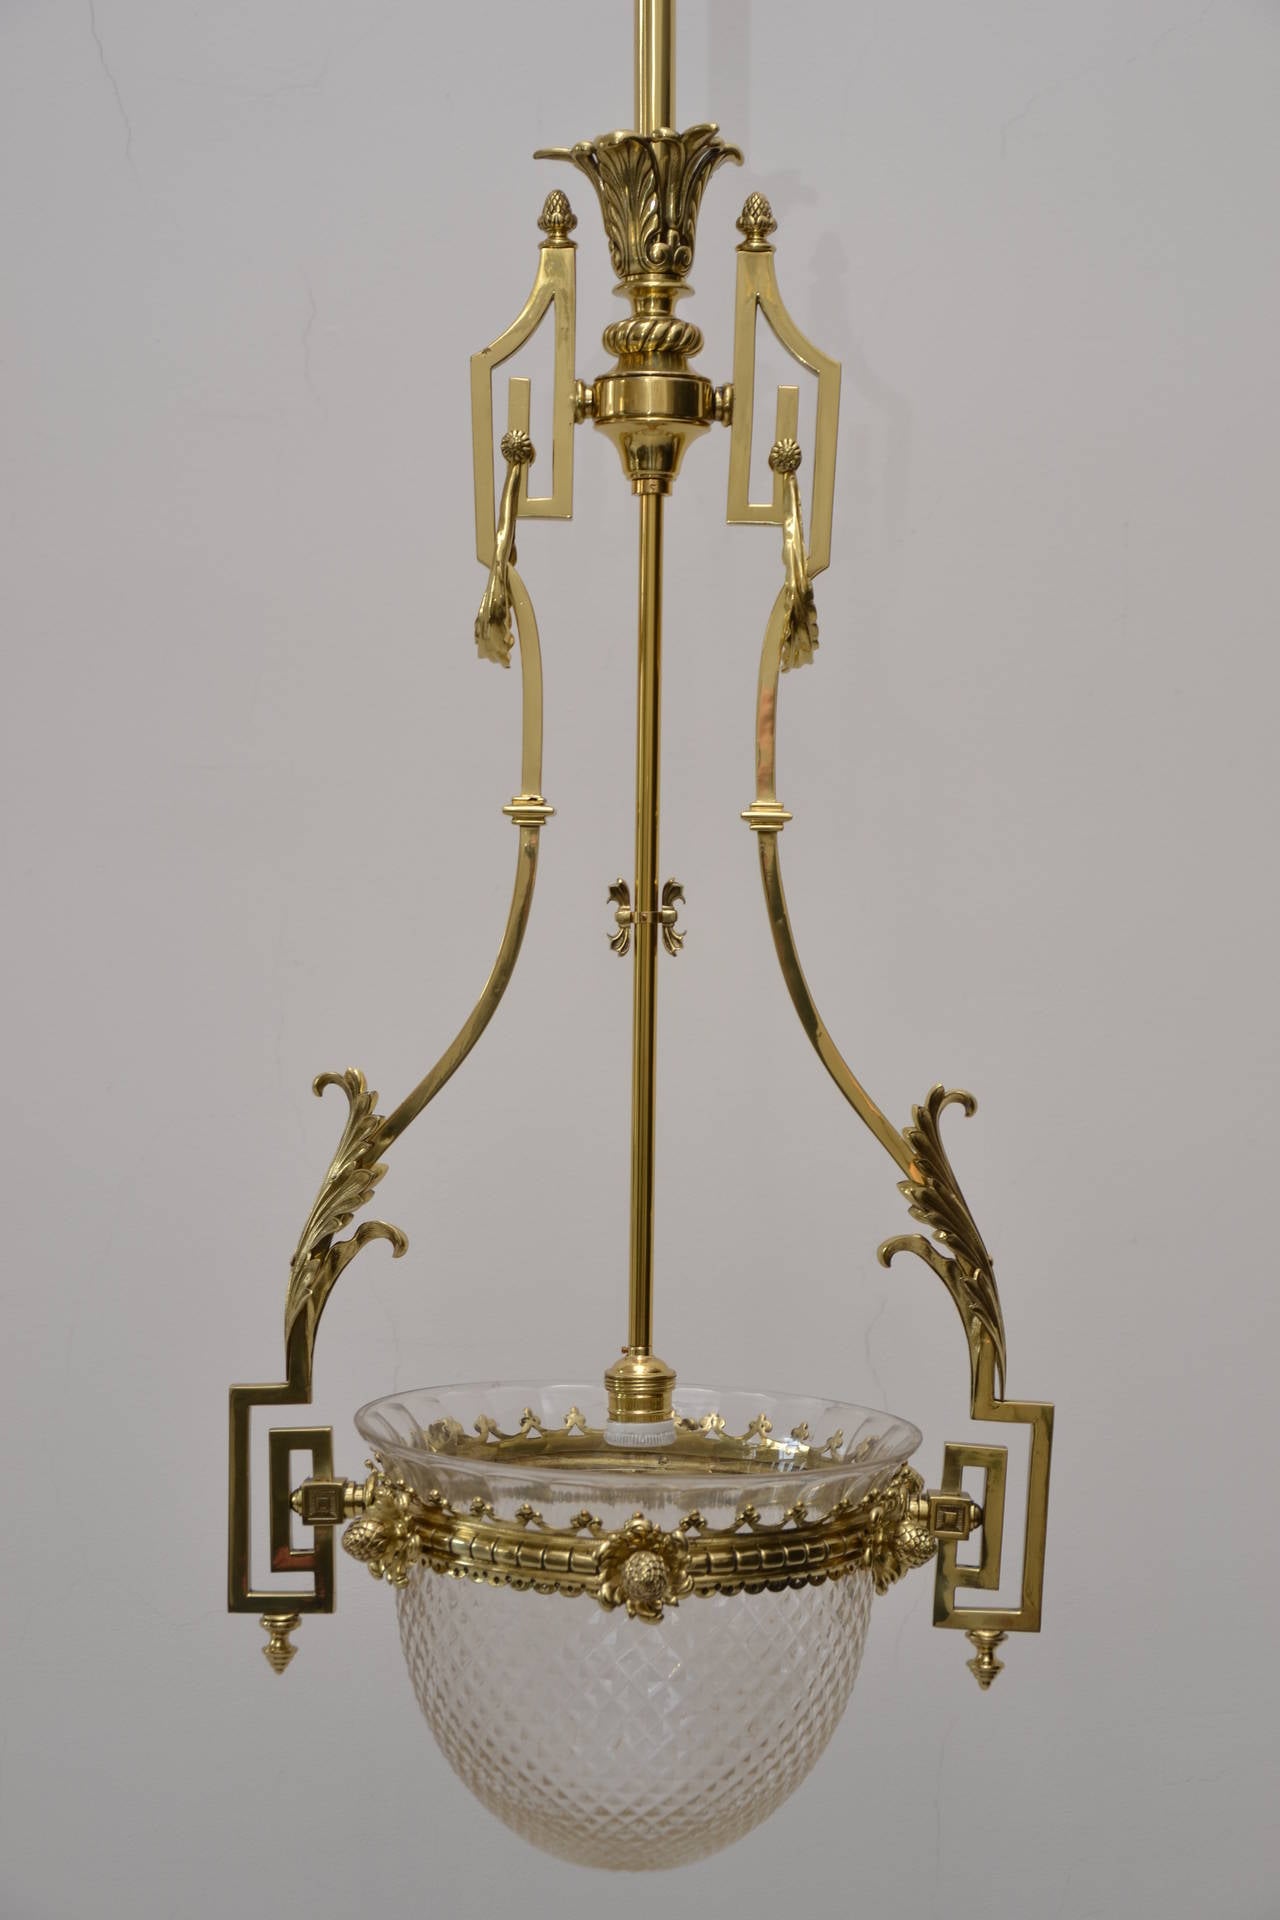 Late 19th century Historistic ceiling lamp with original cut-glass.
Polished and stove enameled